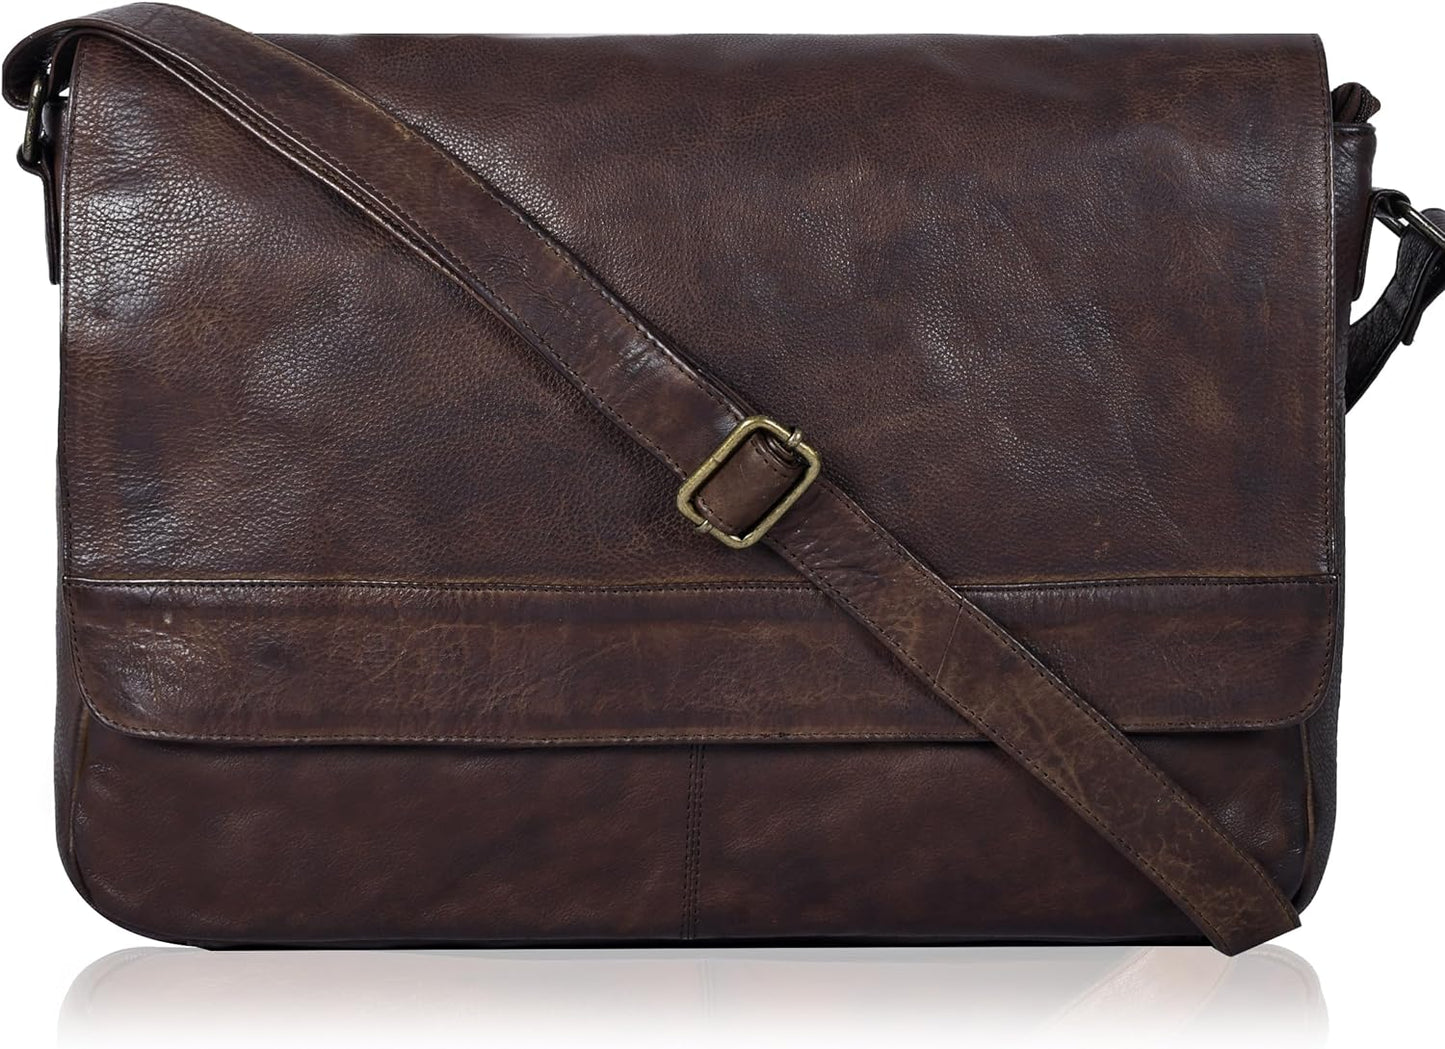 "Premium Genuine Leather Crossbody Messenger Bag - Ideal for 17 Inch Laptops, Travel, and Office Use"